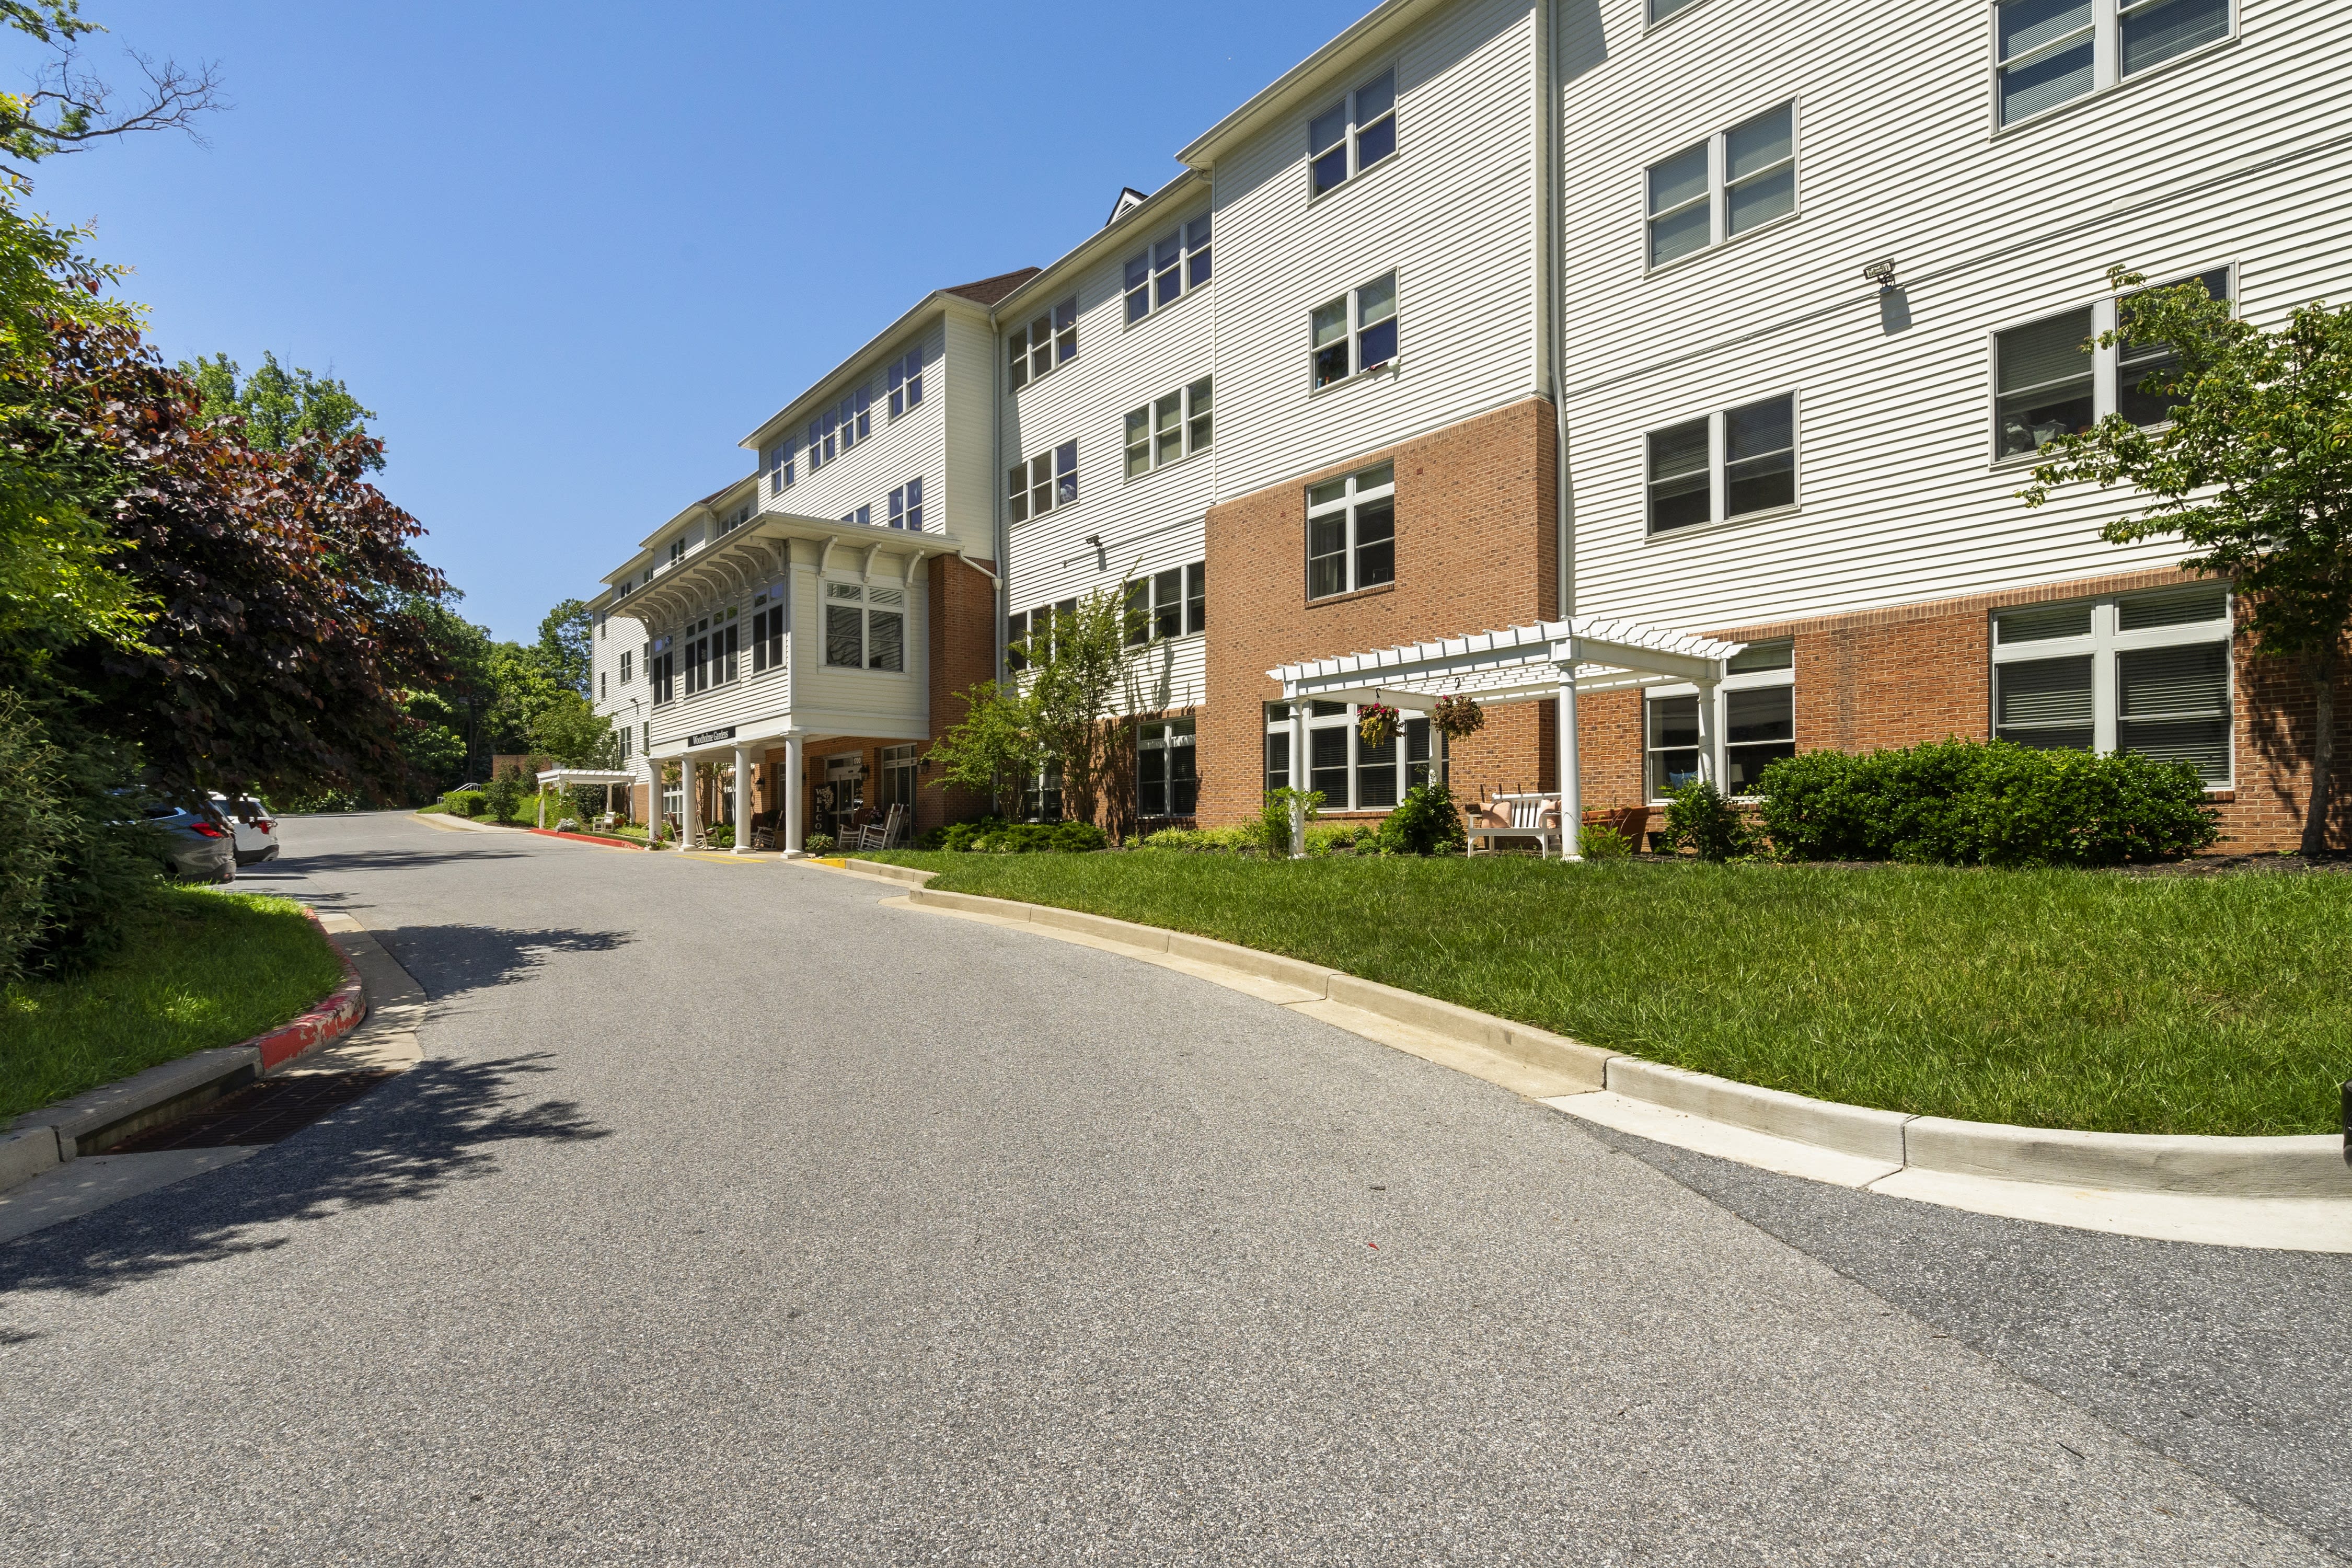 153 Assisted Living Facilities Near Catonsville Md A Place For Mom